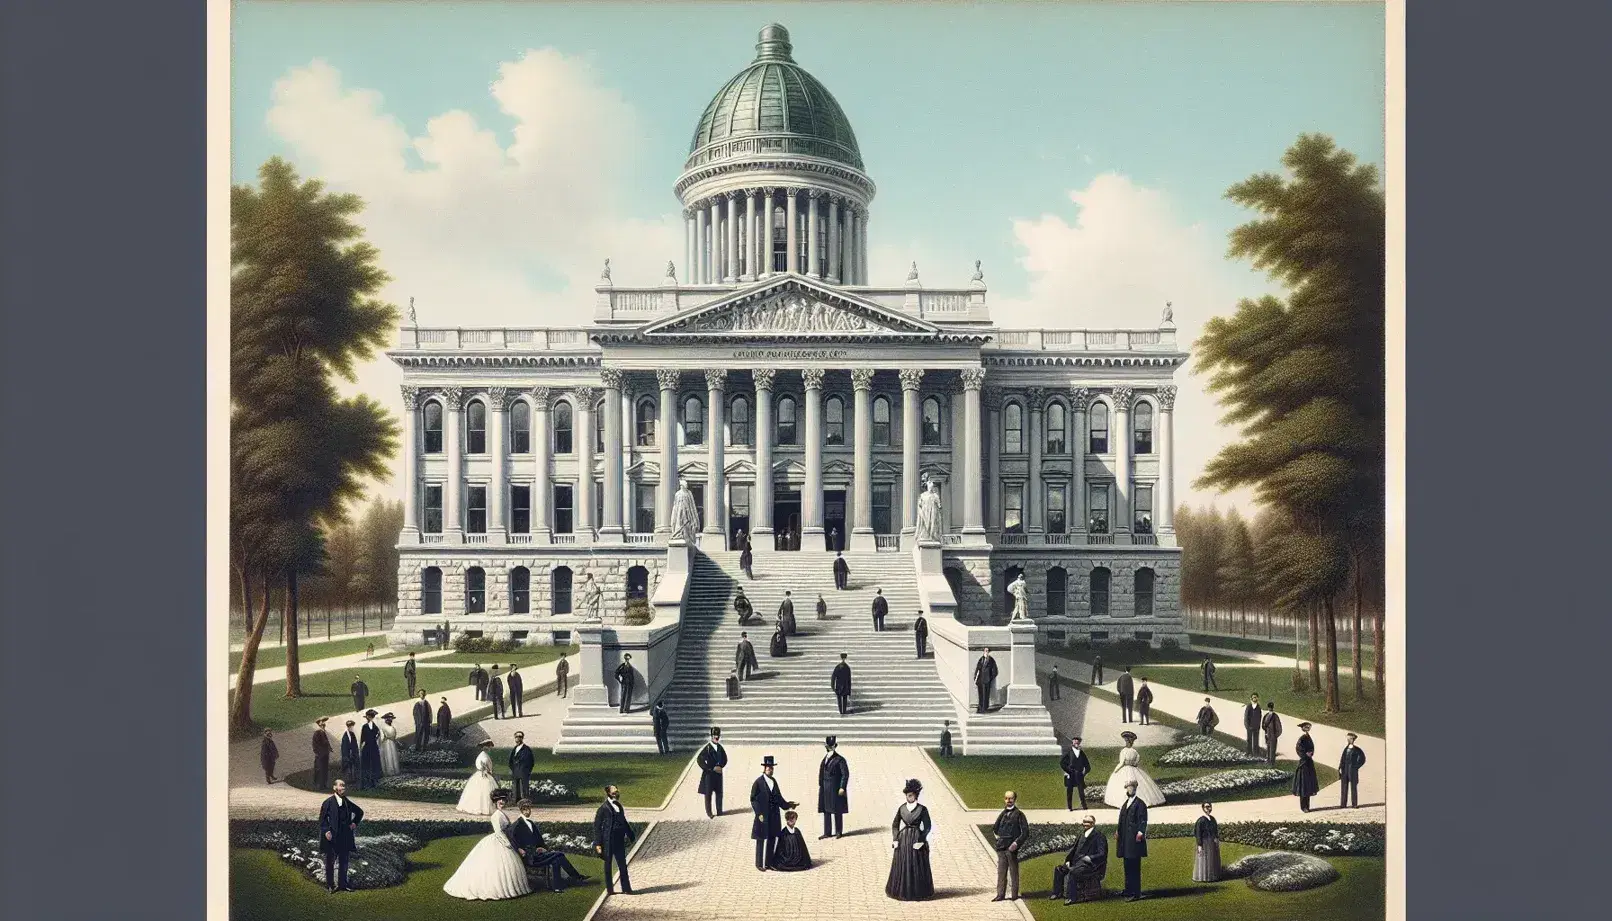 Historic government building in neoclassical style with large dome and Corinthian columns, people in period clothes in front of the entrance over blue sky.